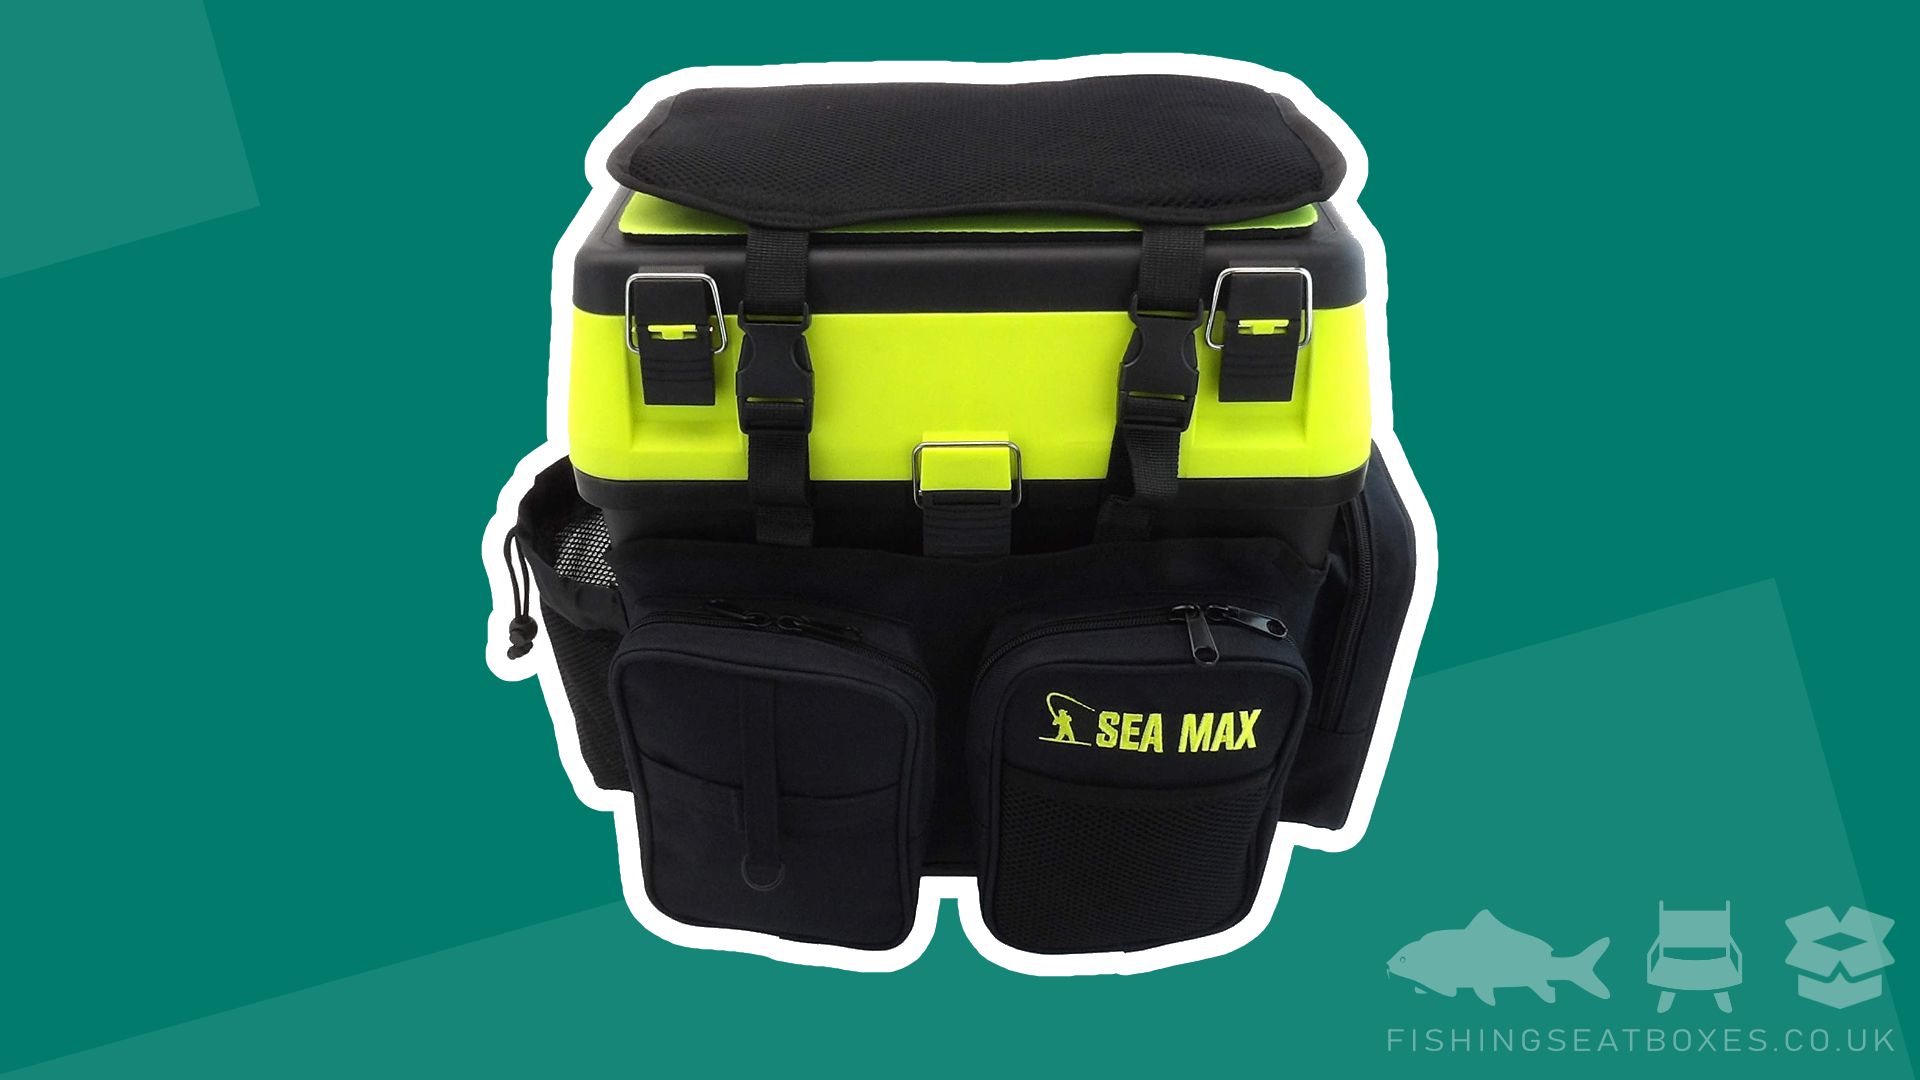 Two Strap Fishing Seat Box from Sea Max - Very Impressive!